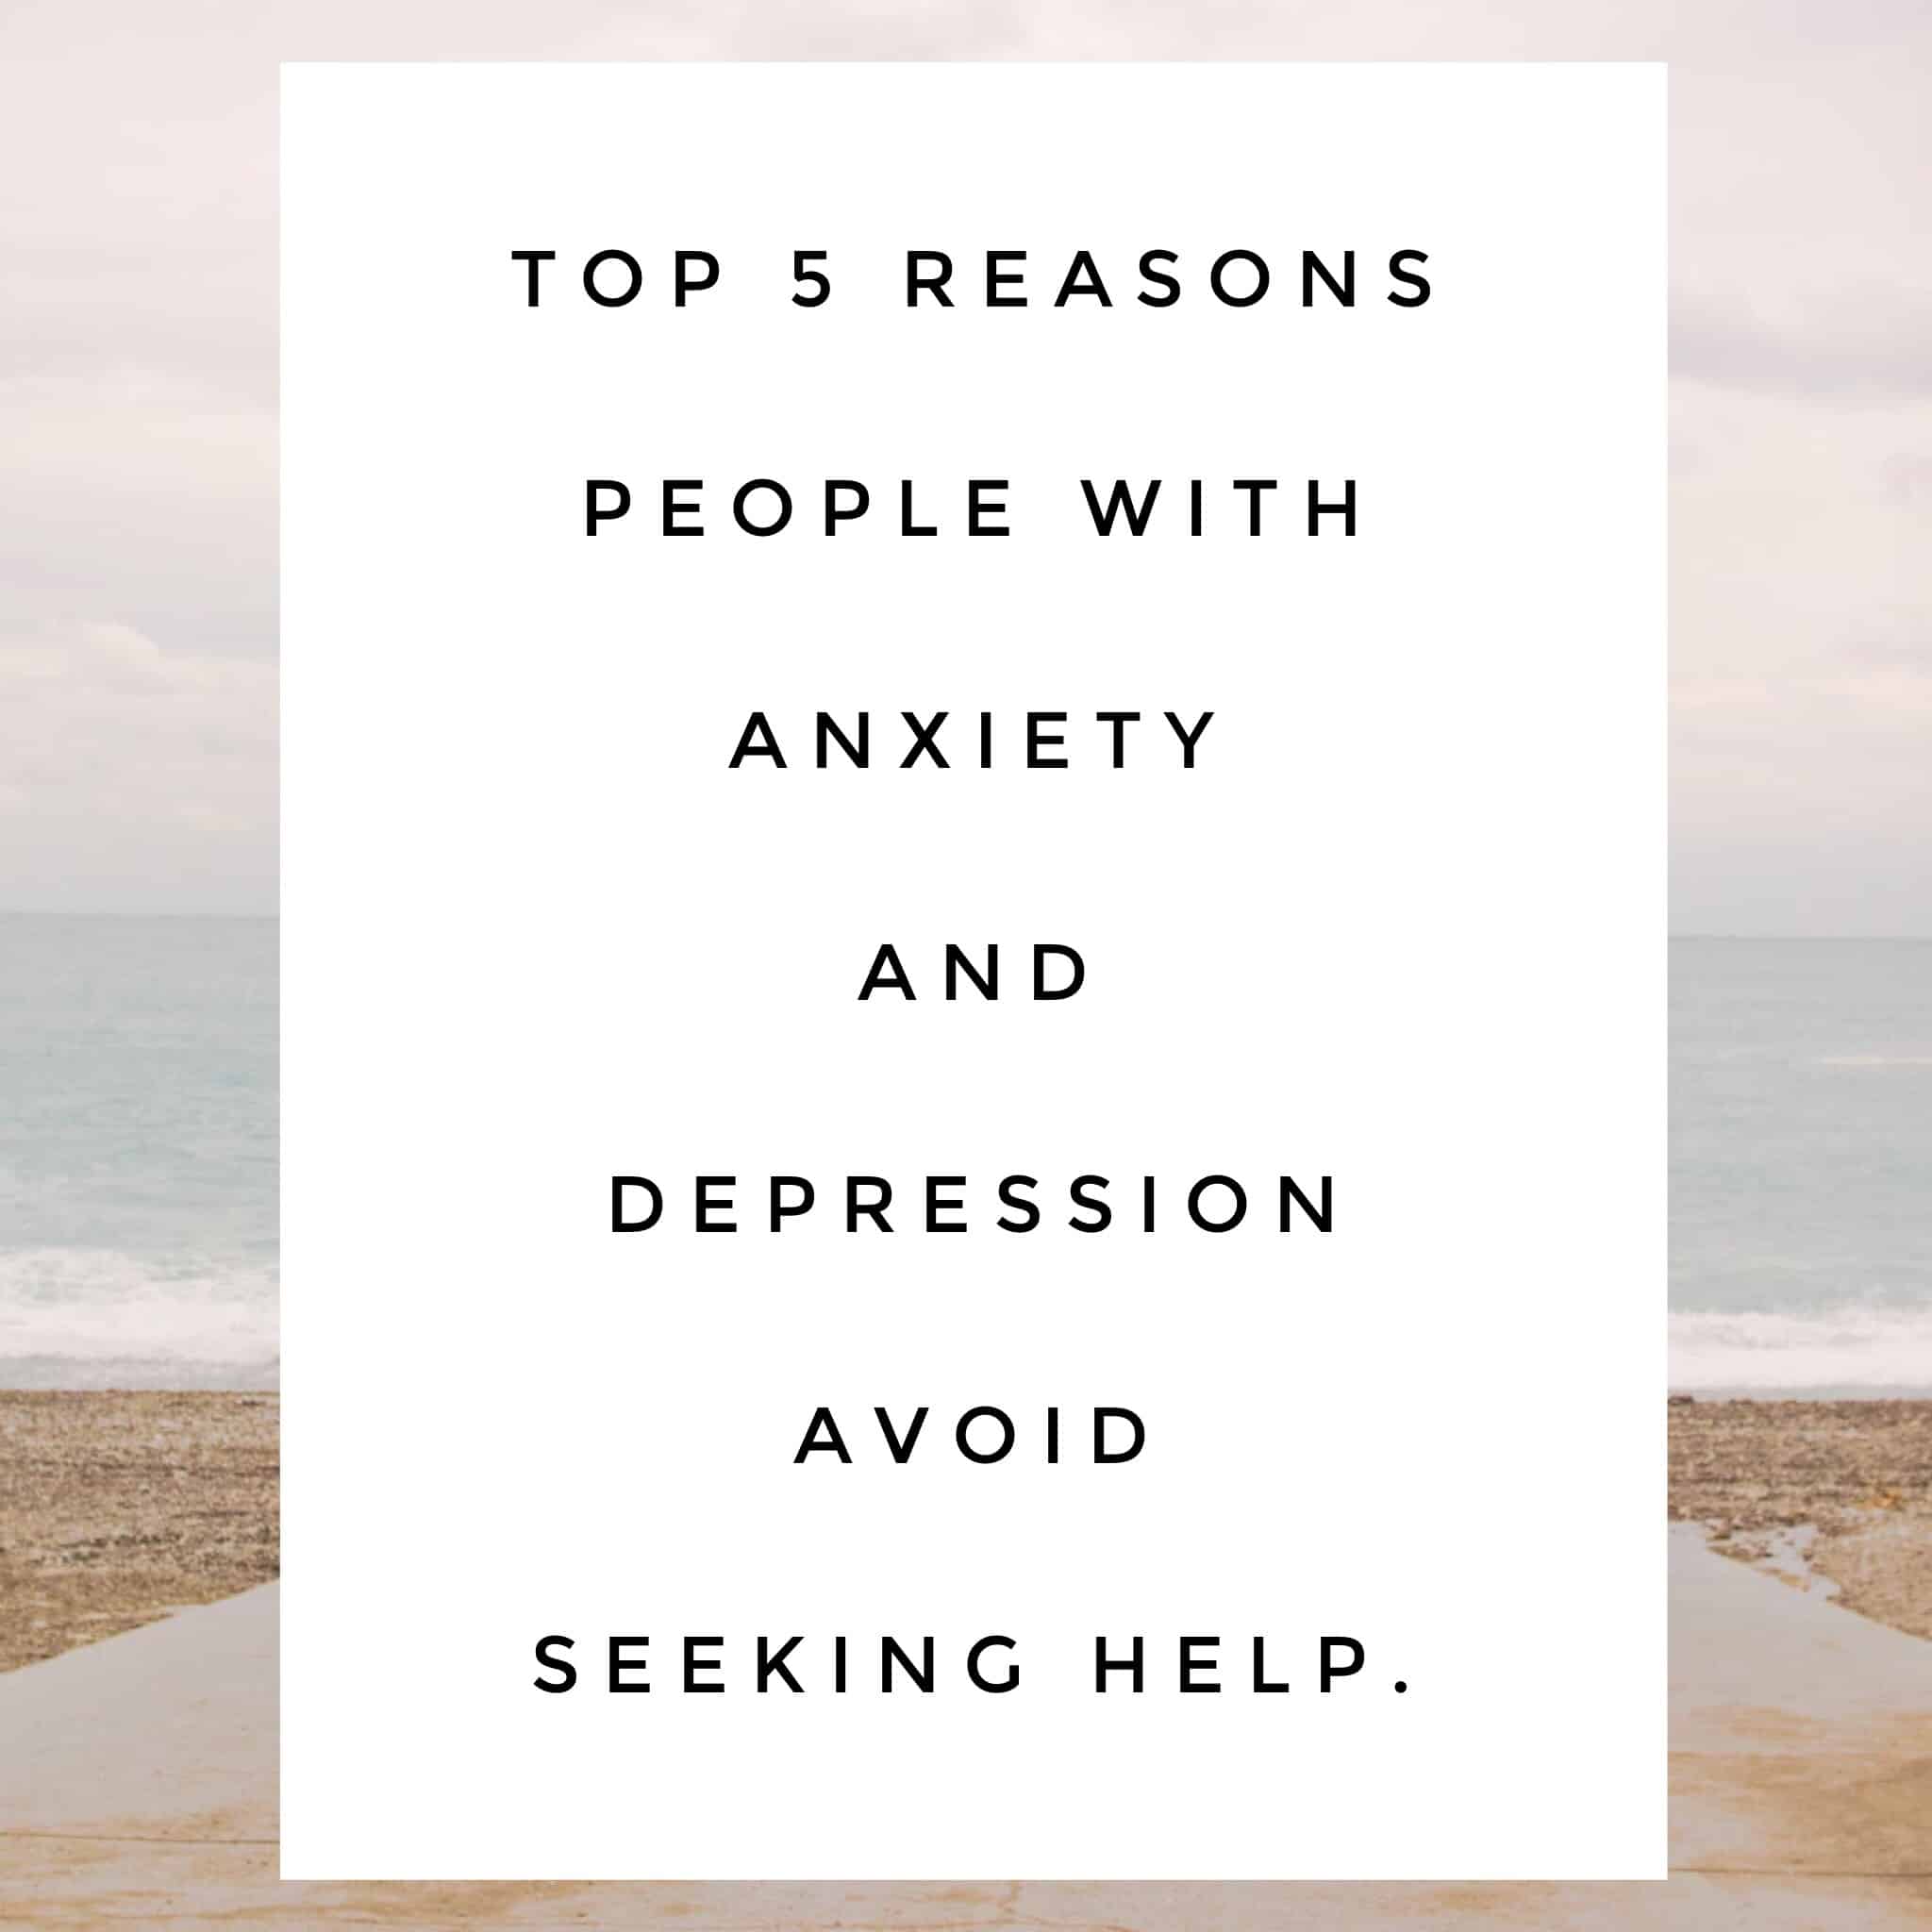 Top reasons why people with anxiety and depression avoid seeking help